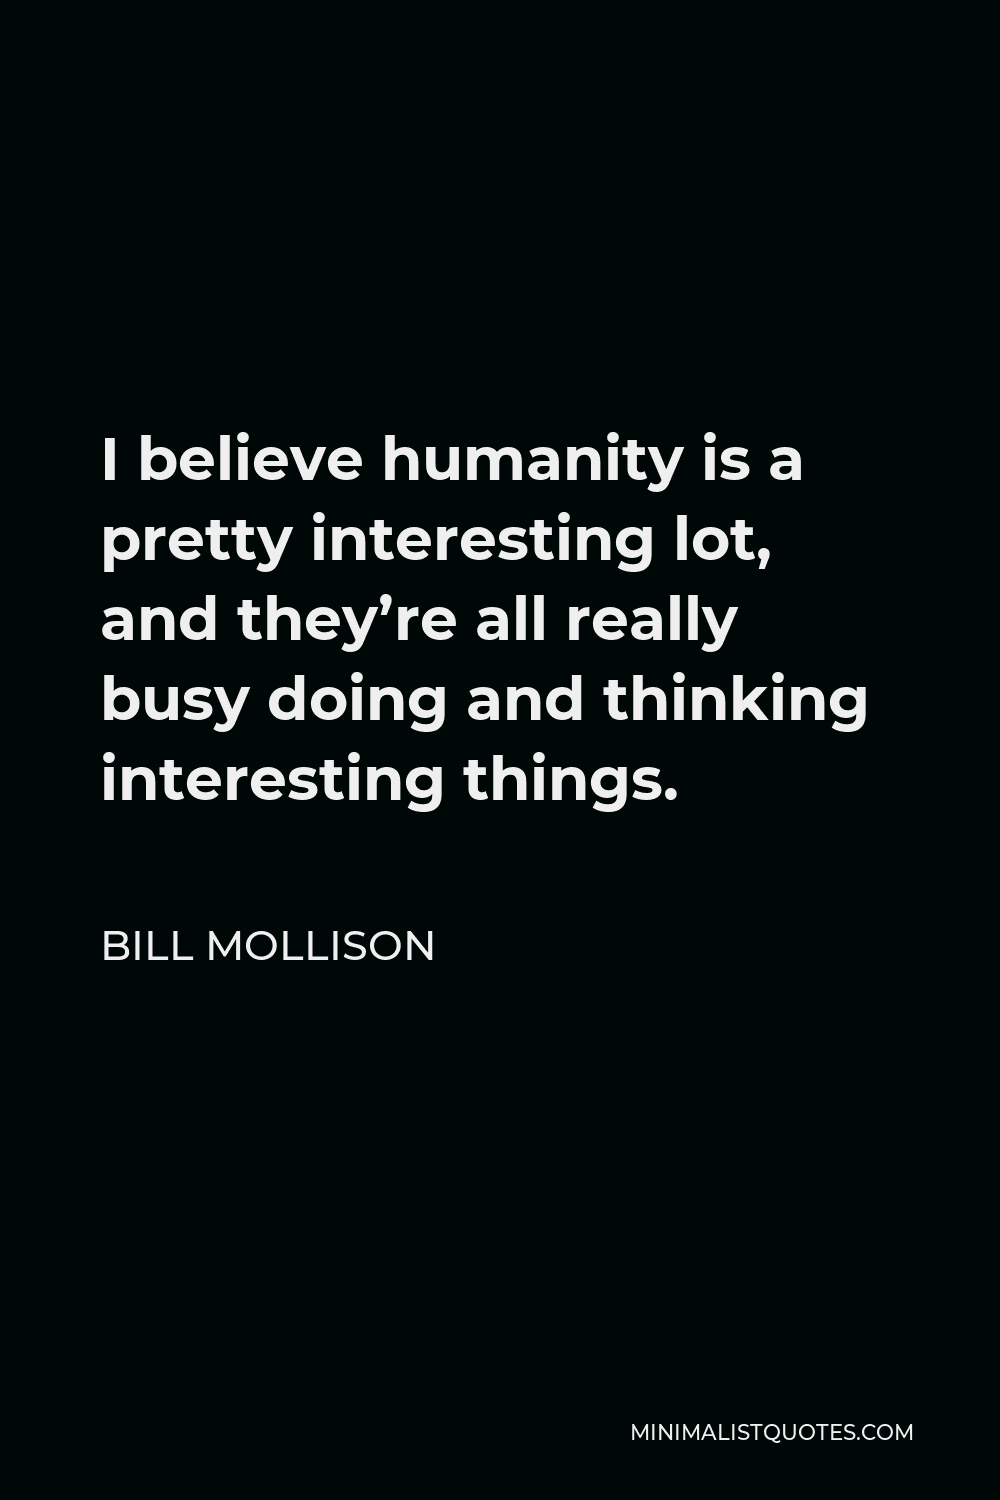 Bill Mollison Quote - I believe humanity is a pretty interesting lot, and they’re all really busy doing and thinking interesting things.